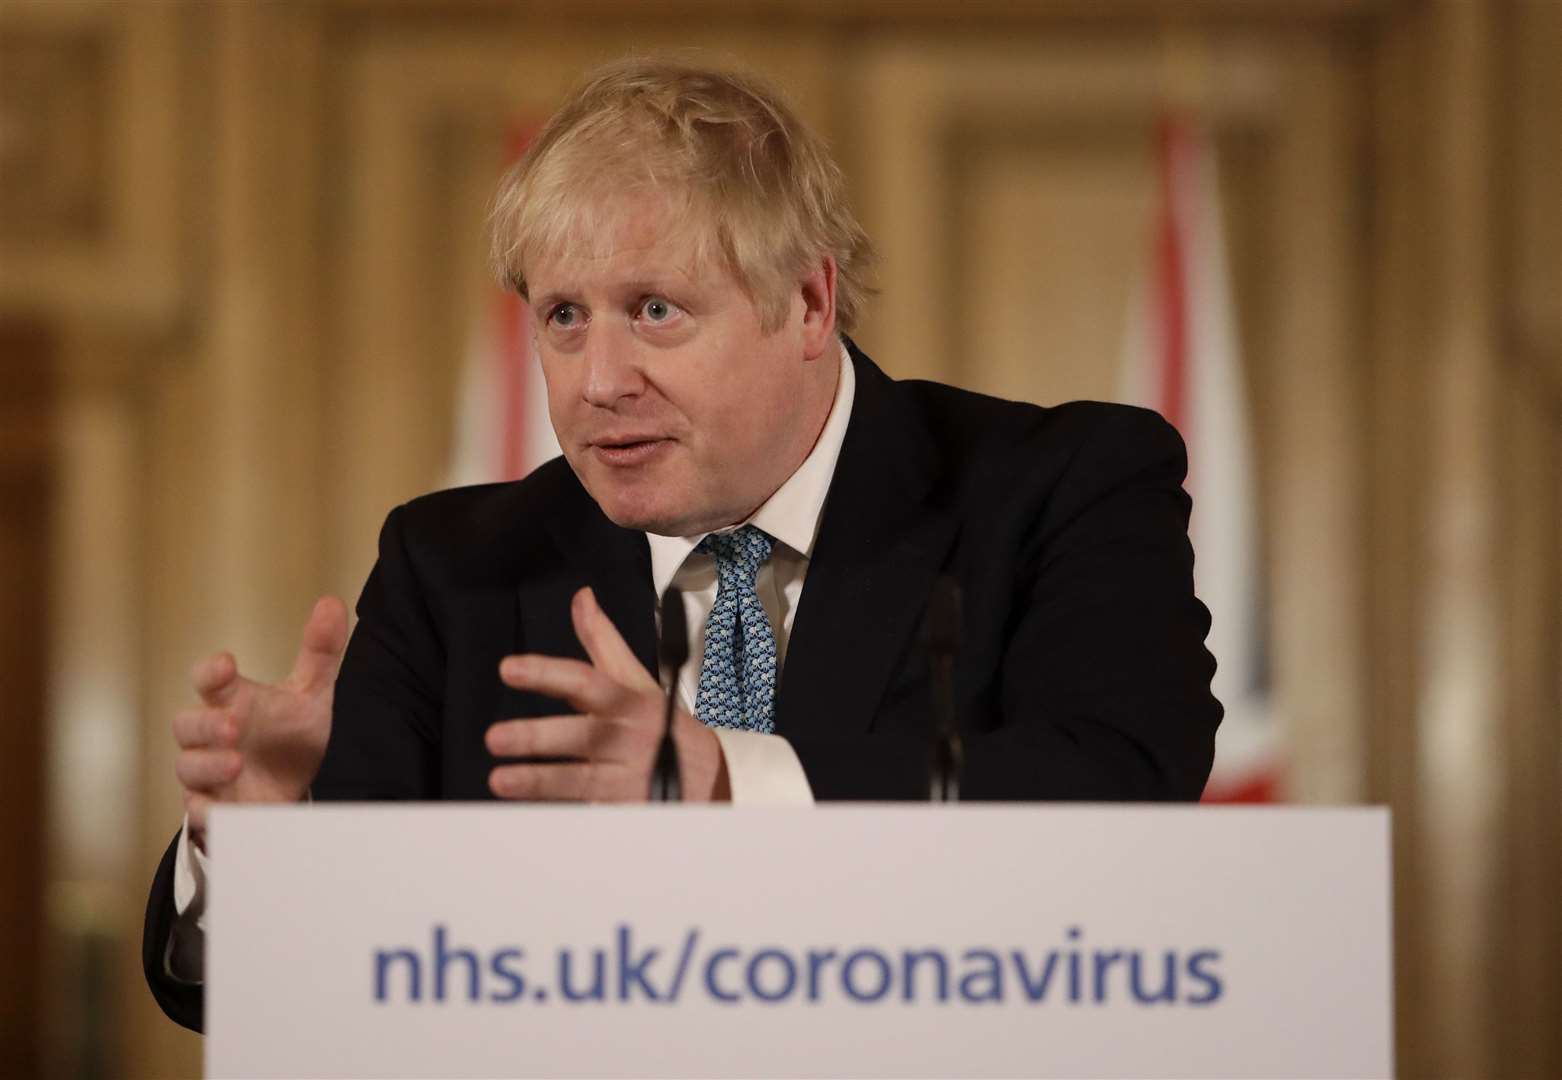 Prime Minister Boris Johnson speaking at a briefing in Downing Street